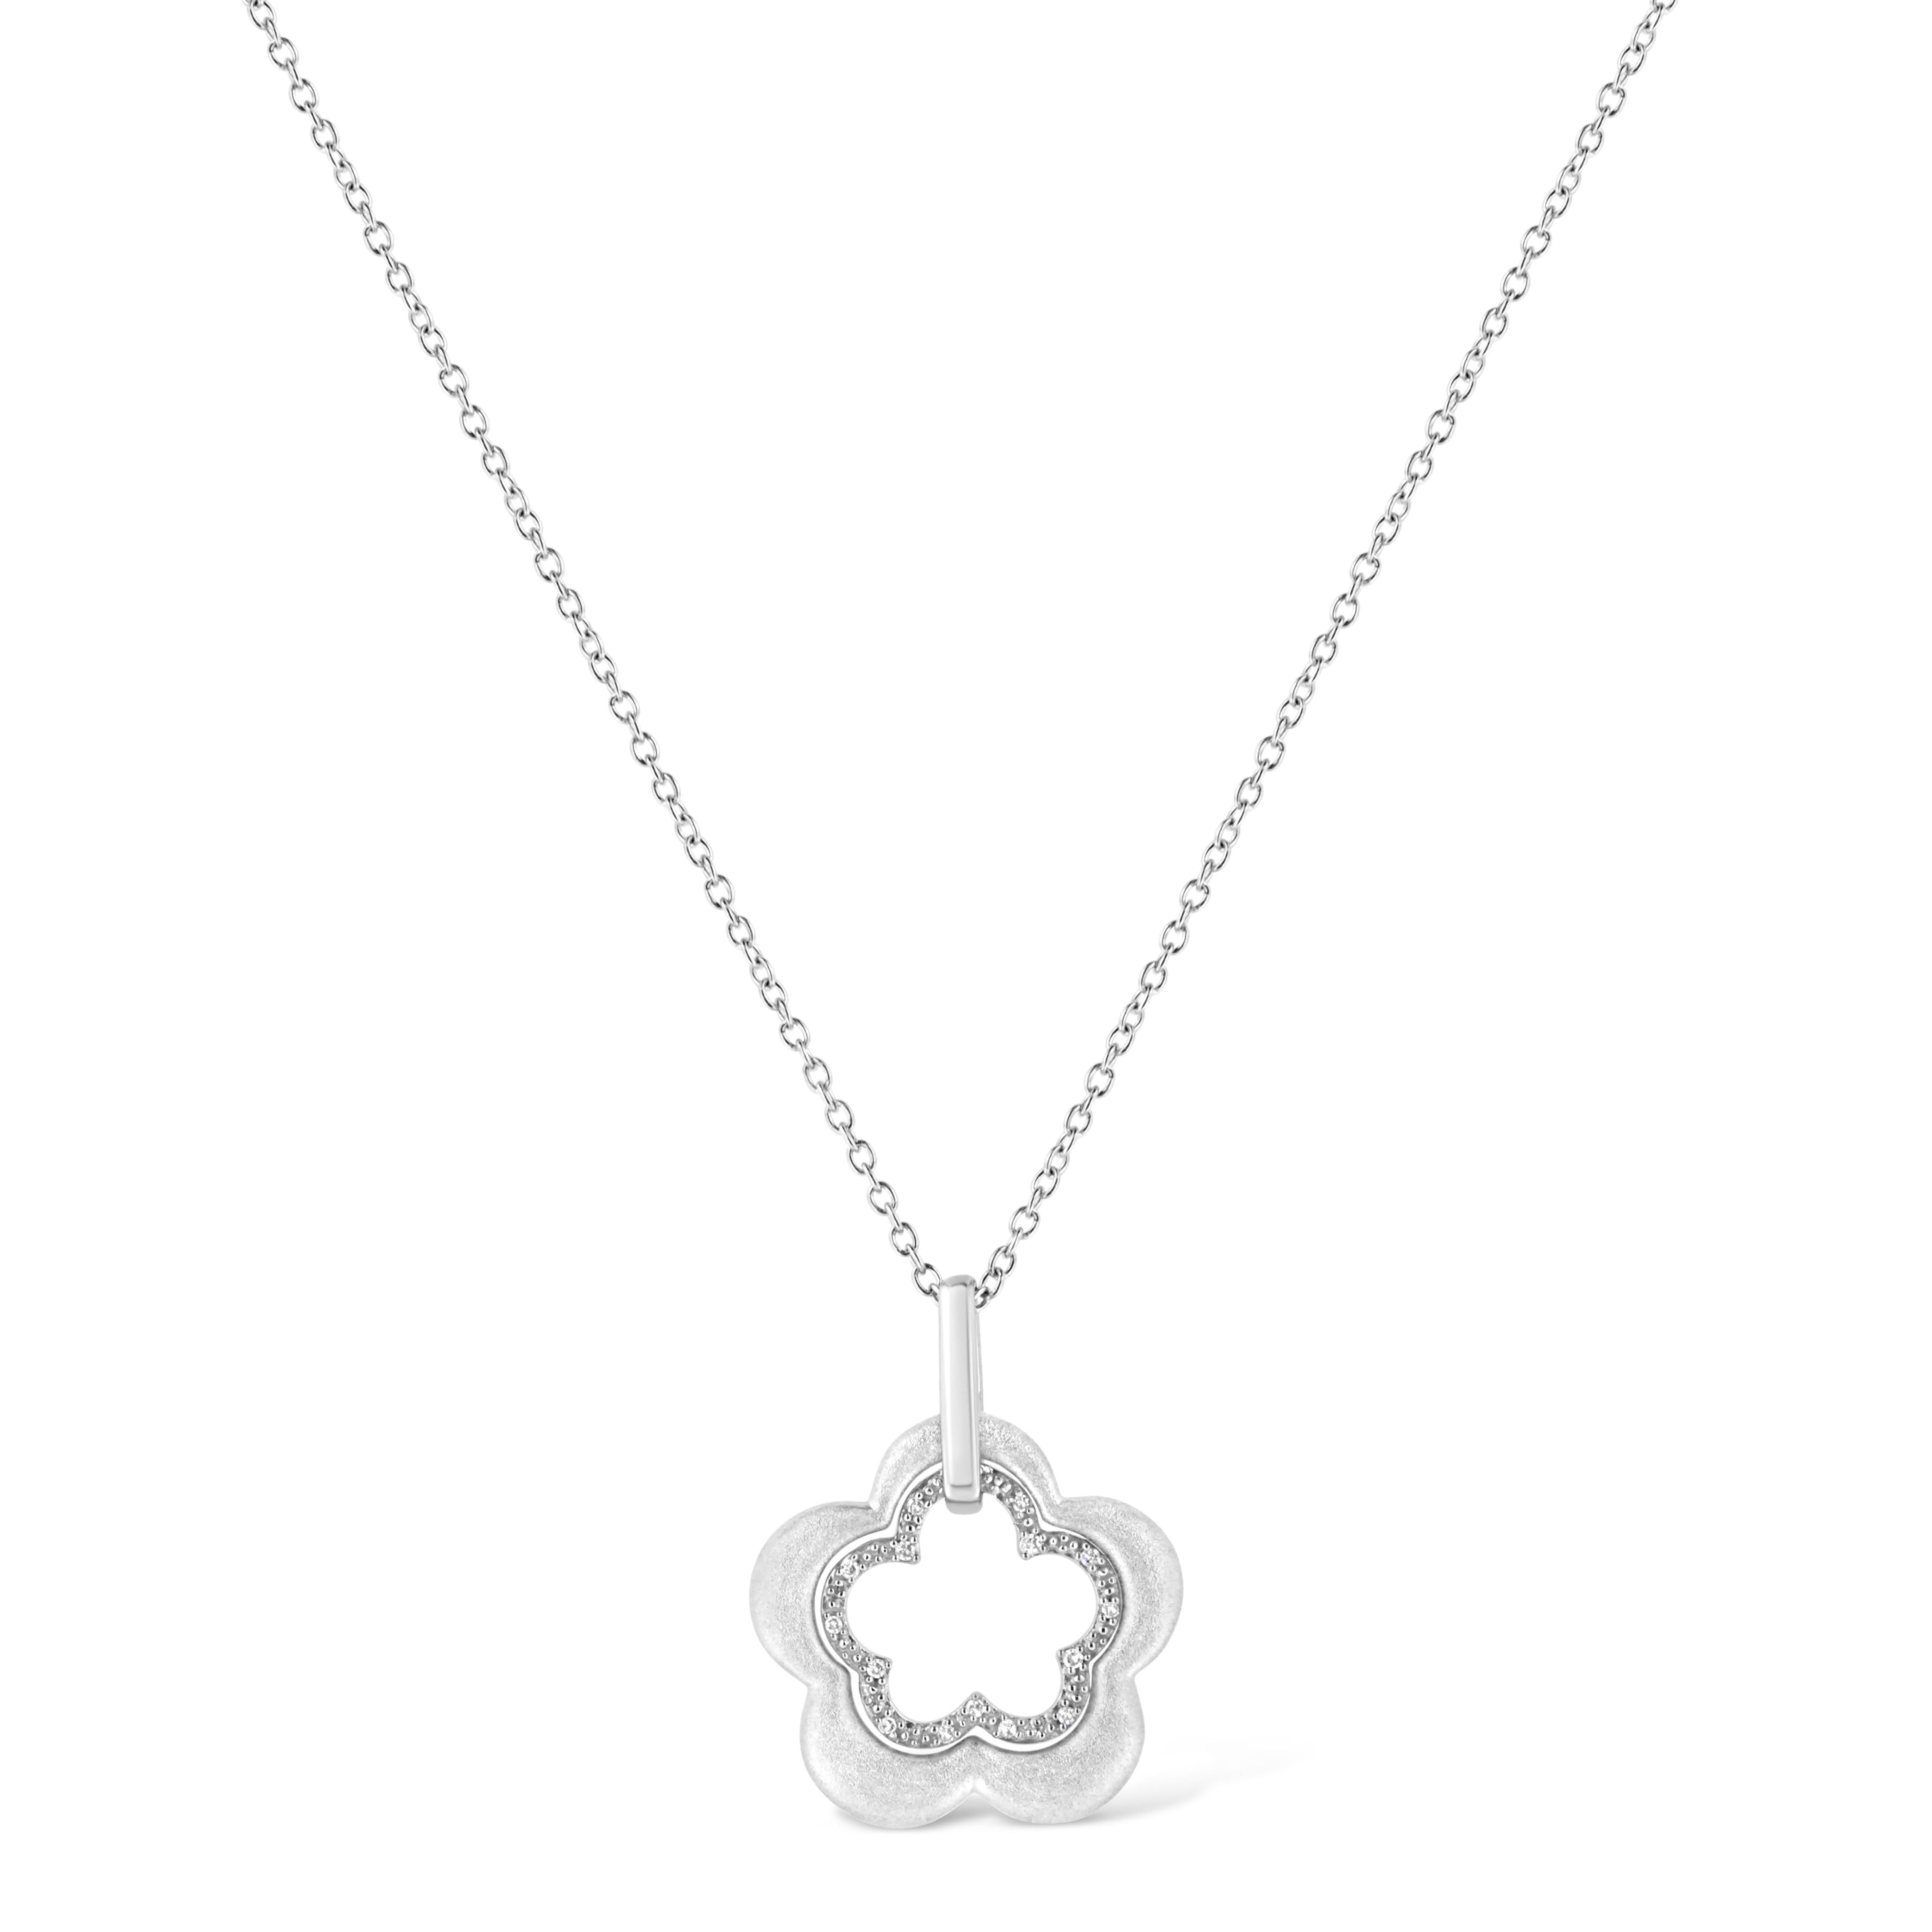 Allure your loved ones with this stylish diamond flower pendant. Gorgeous pendant rendered perfectly on glinting sterling silver showcasing 15 sparkling pave set single cut diamonds, set on floral motif and dangles from a shimmering cable chain. The